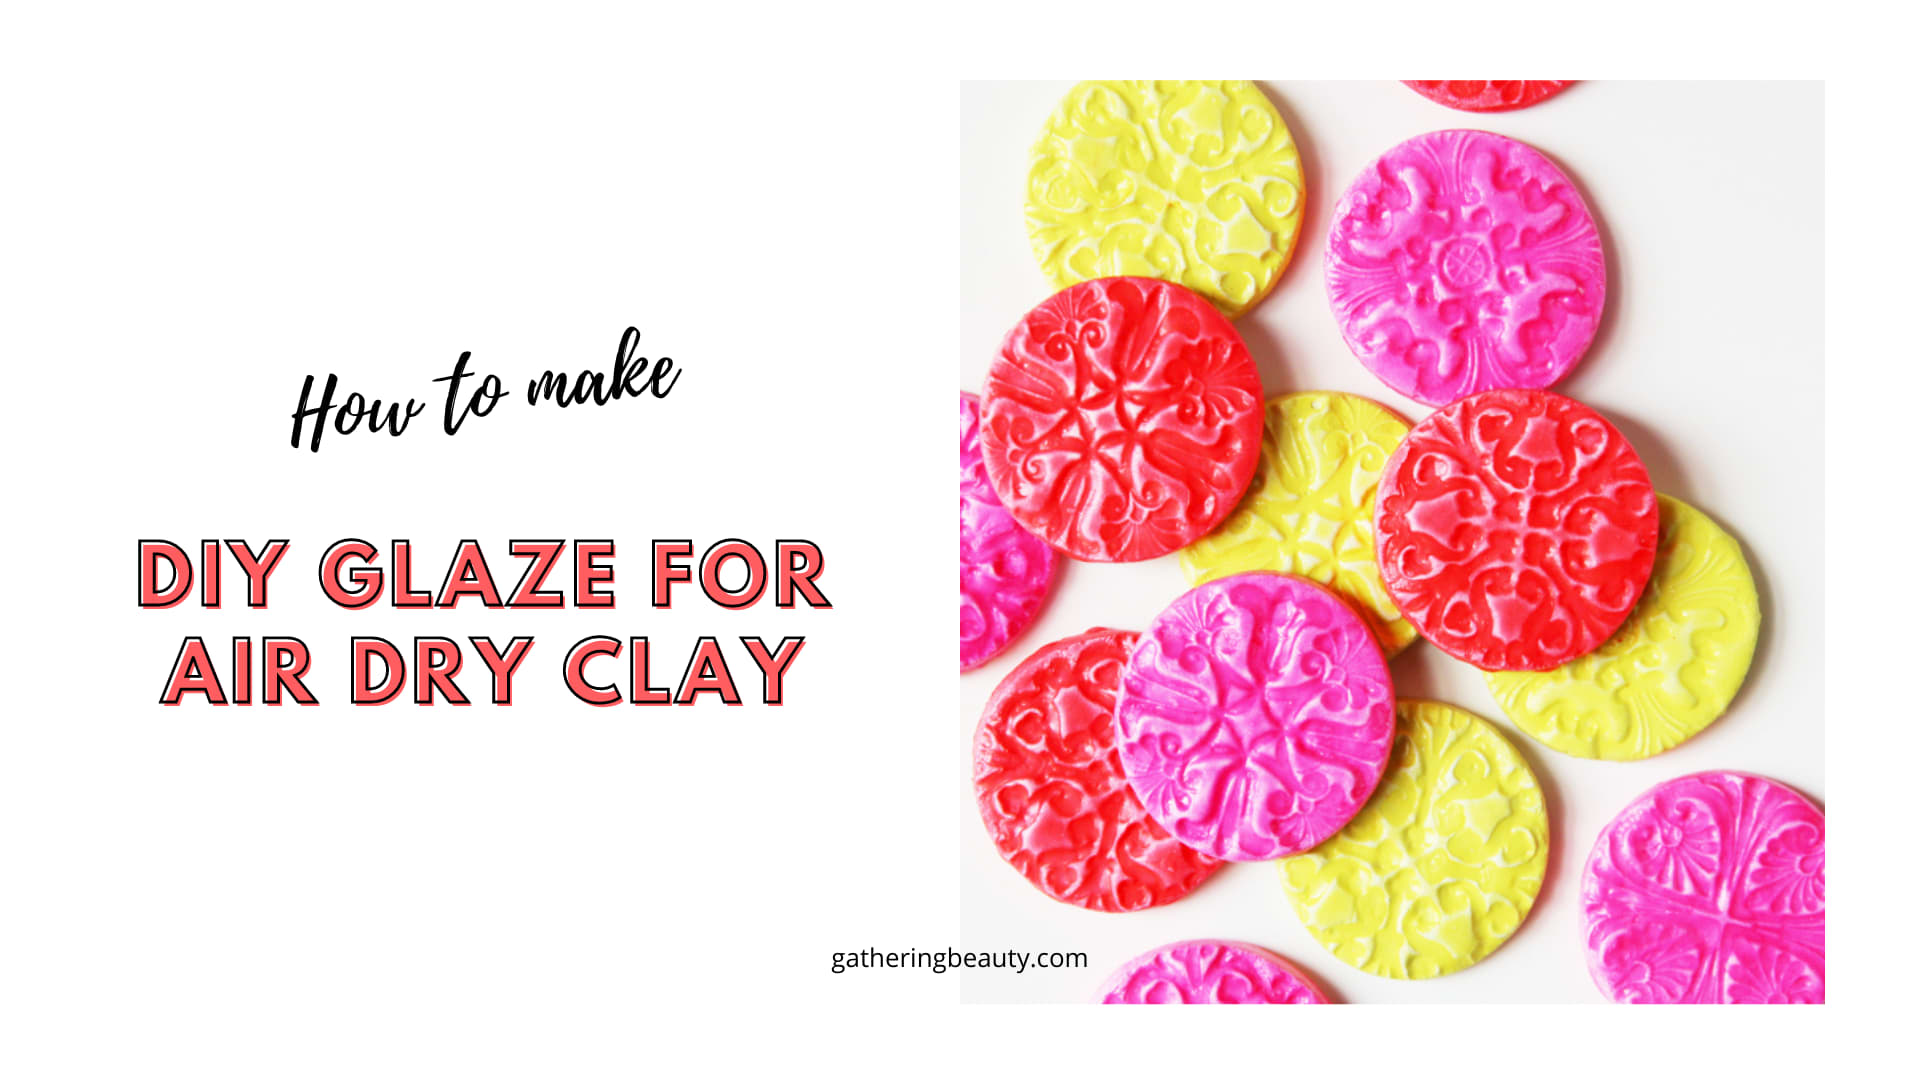 DIY Glaze For Air Dry Clay Story - Gathering Beauty